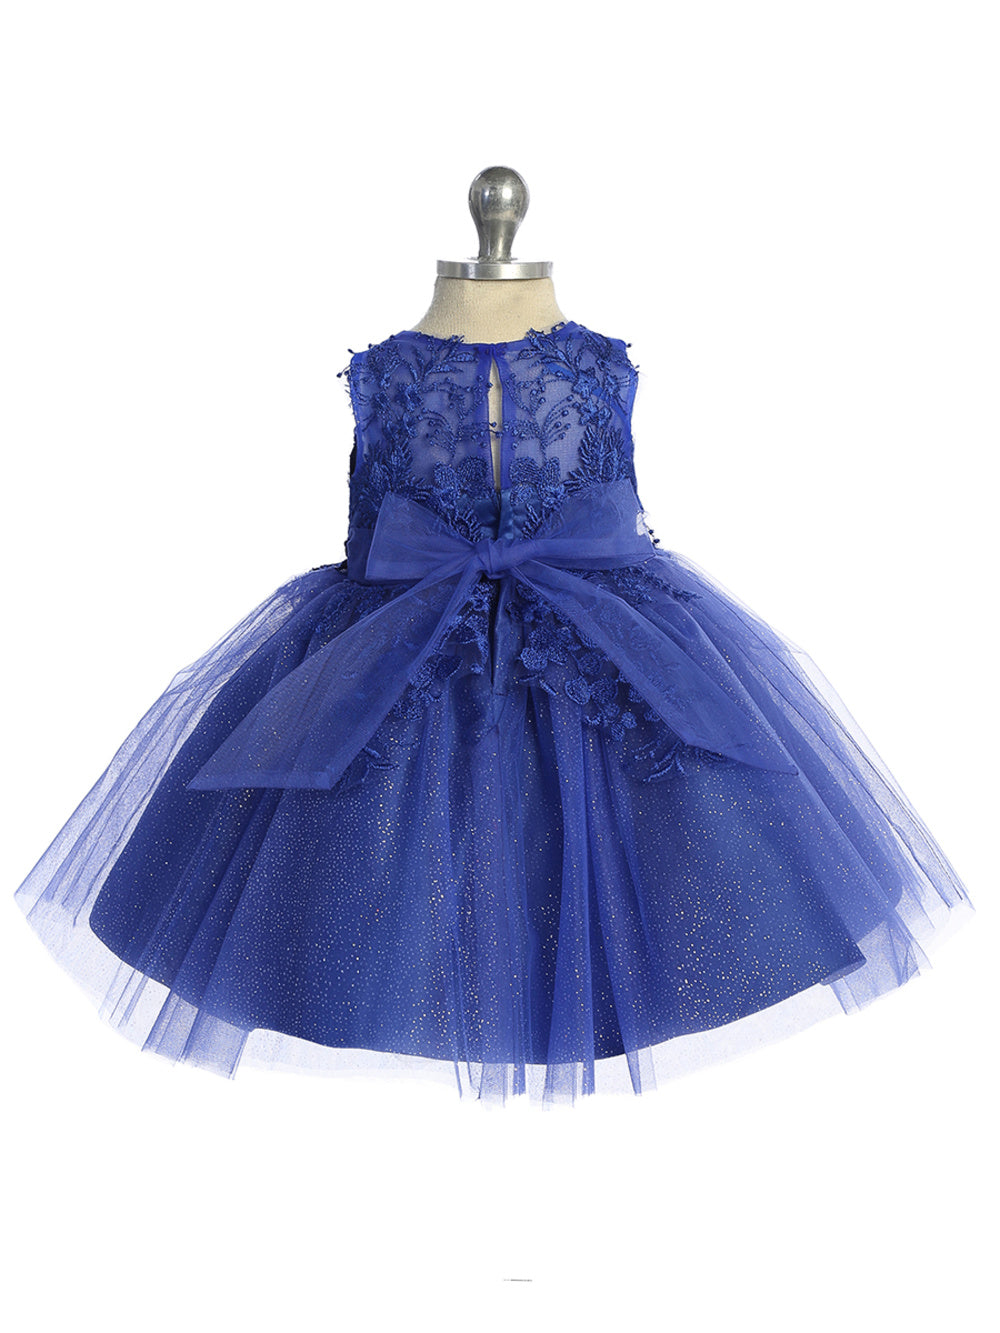 Baby Dress with Beautiful Illusion Neckline Bodice by TIPTOP KIDS - AS7038S